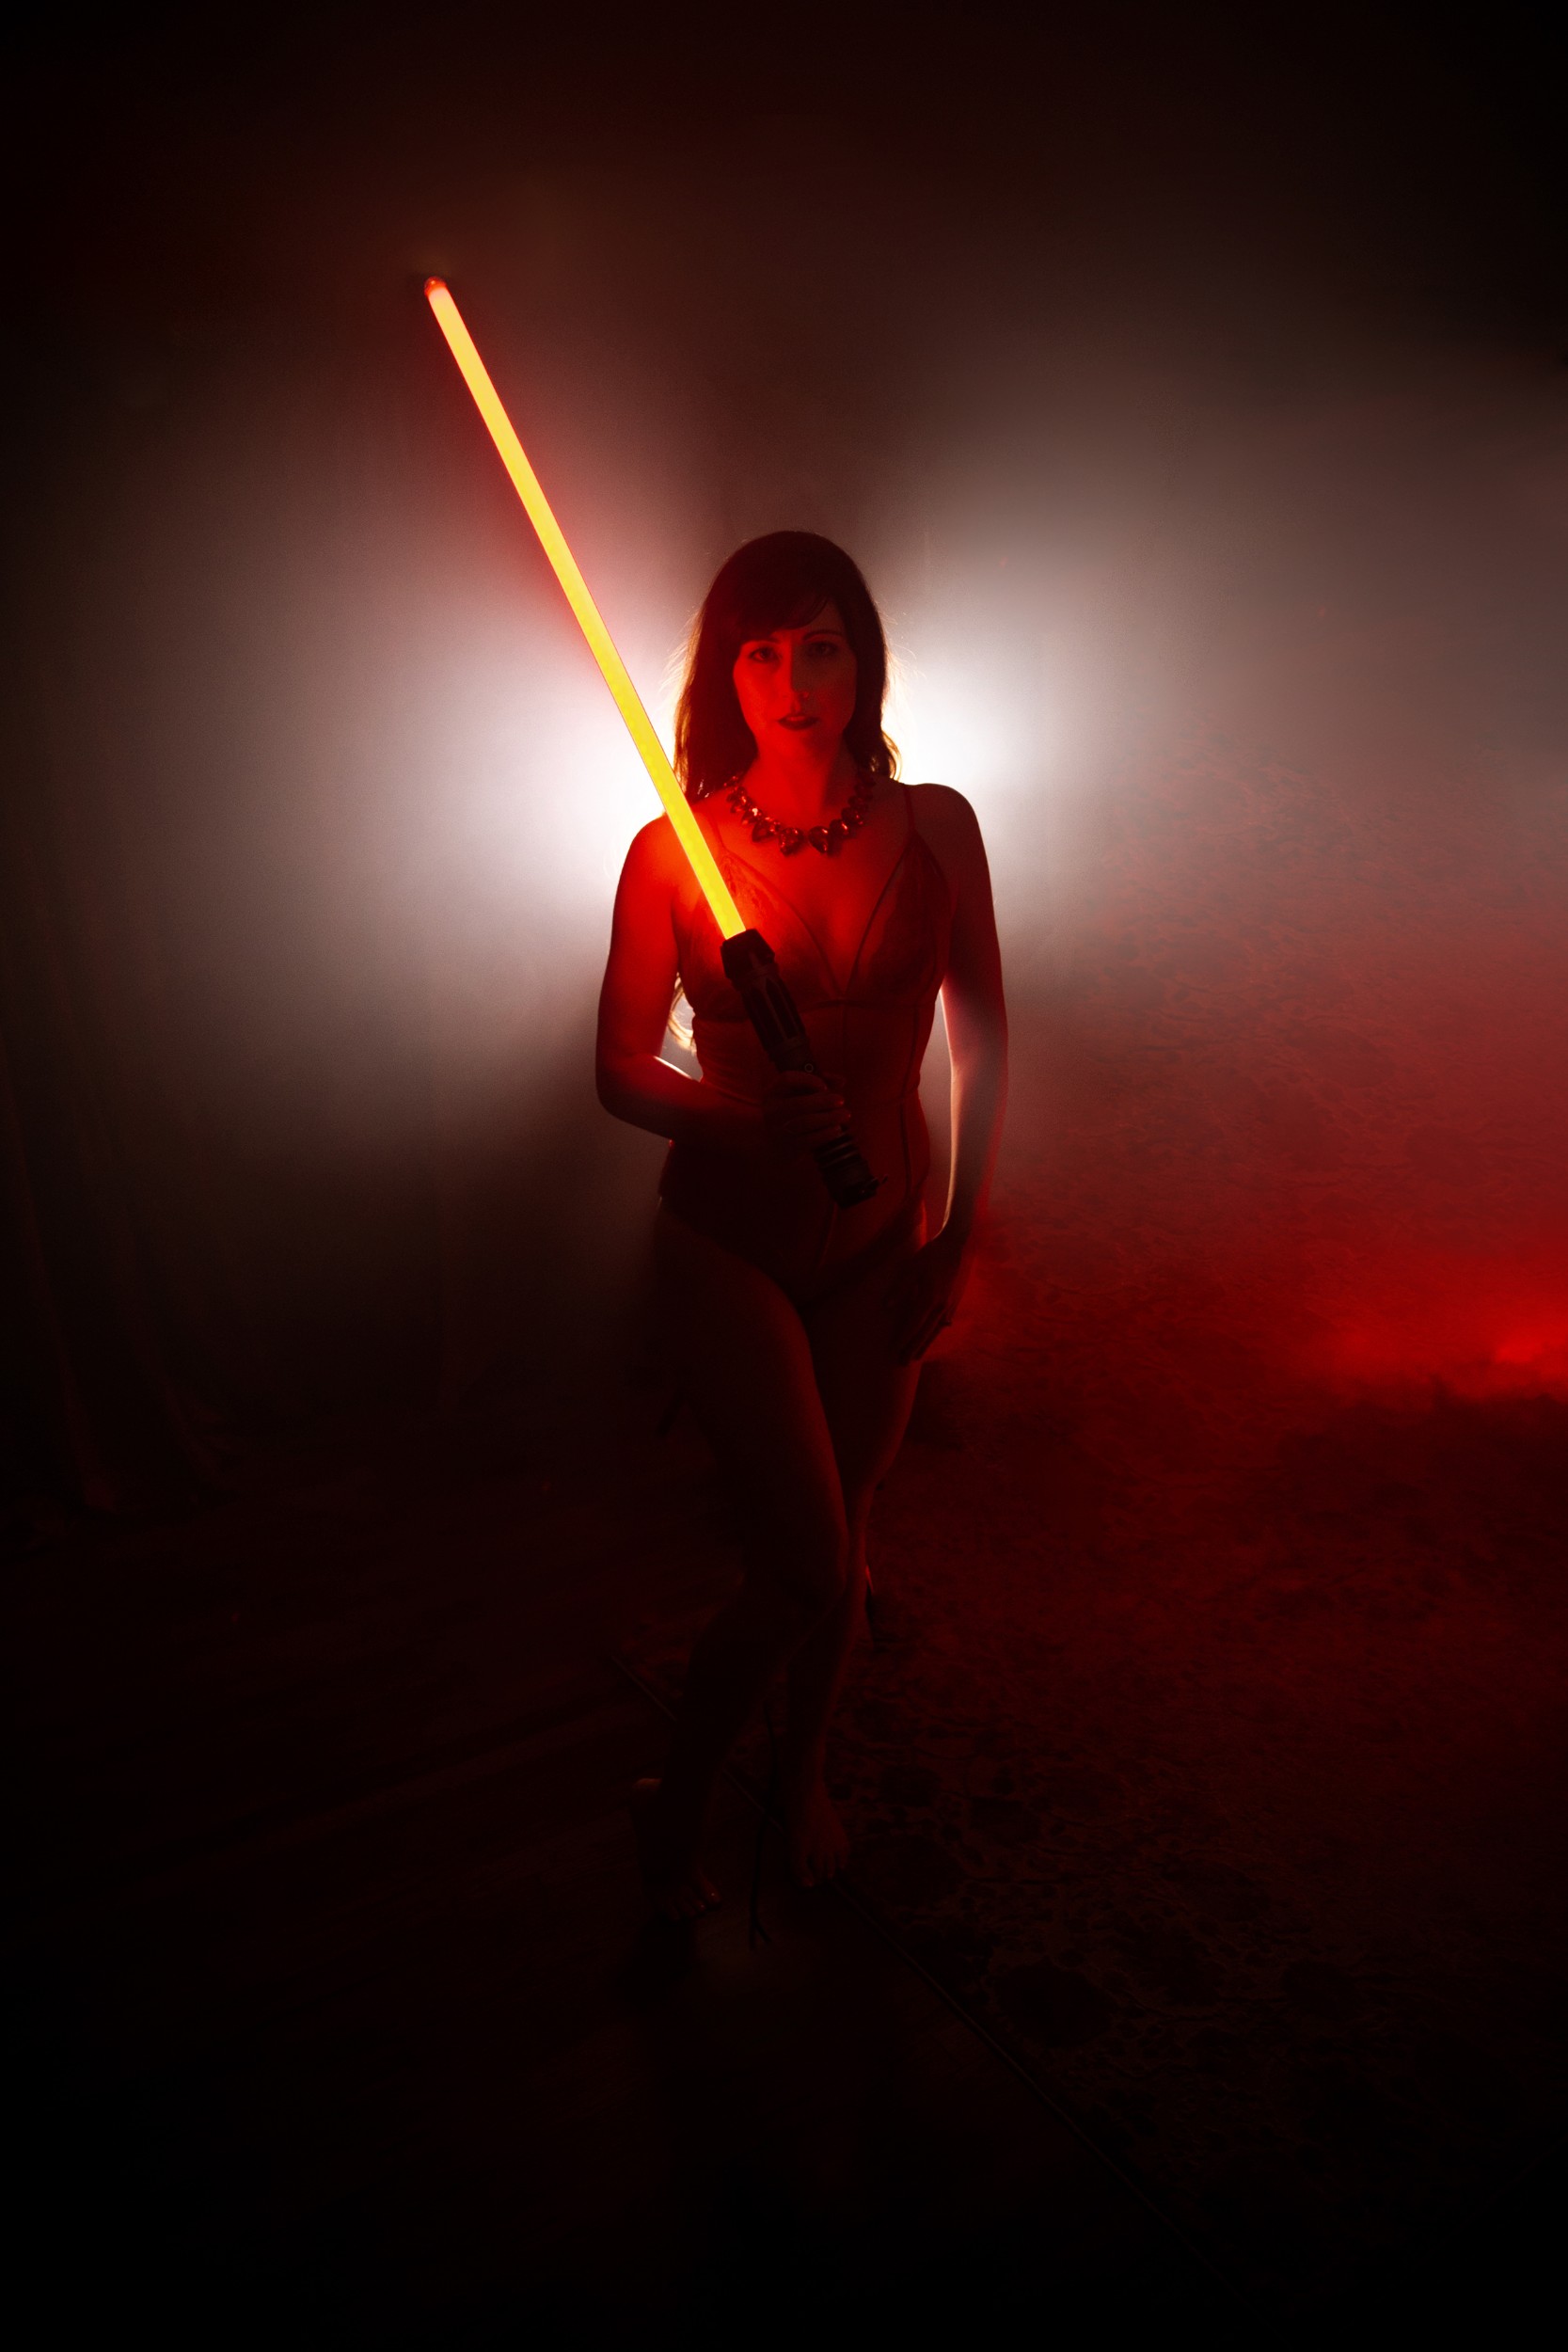 woman posing in lingerie holding a lightsaber